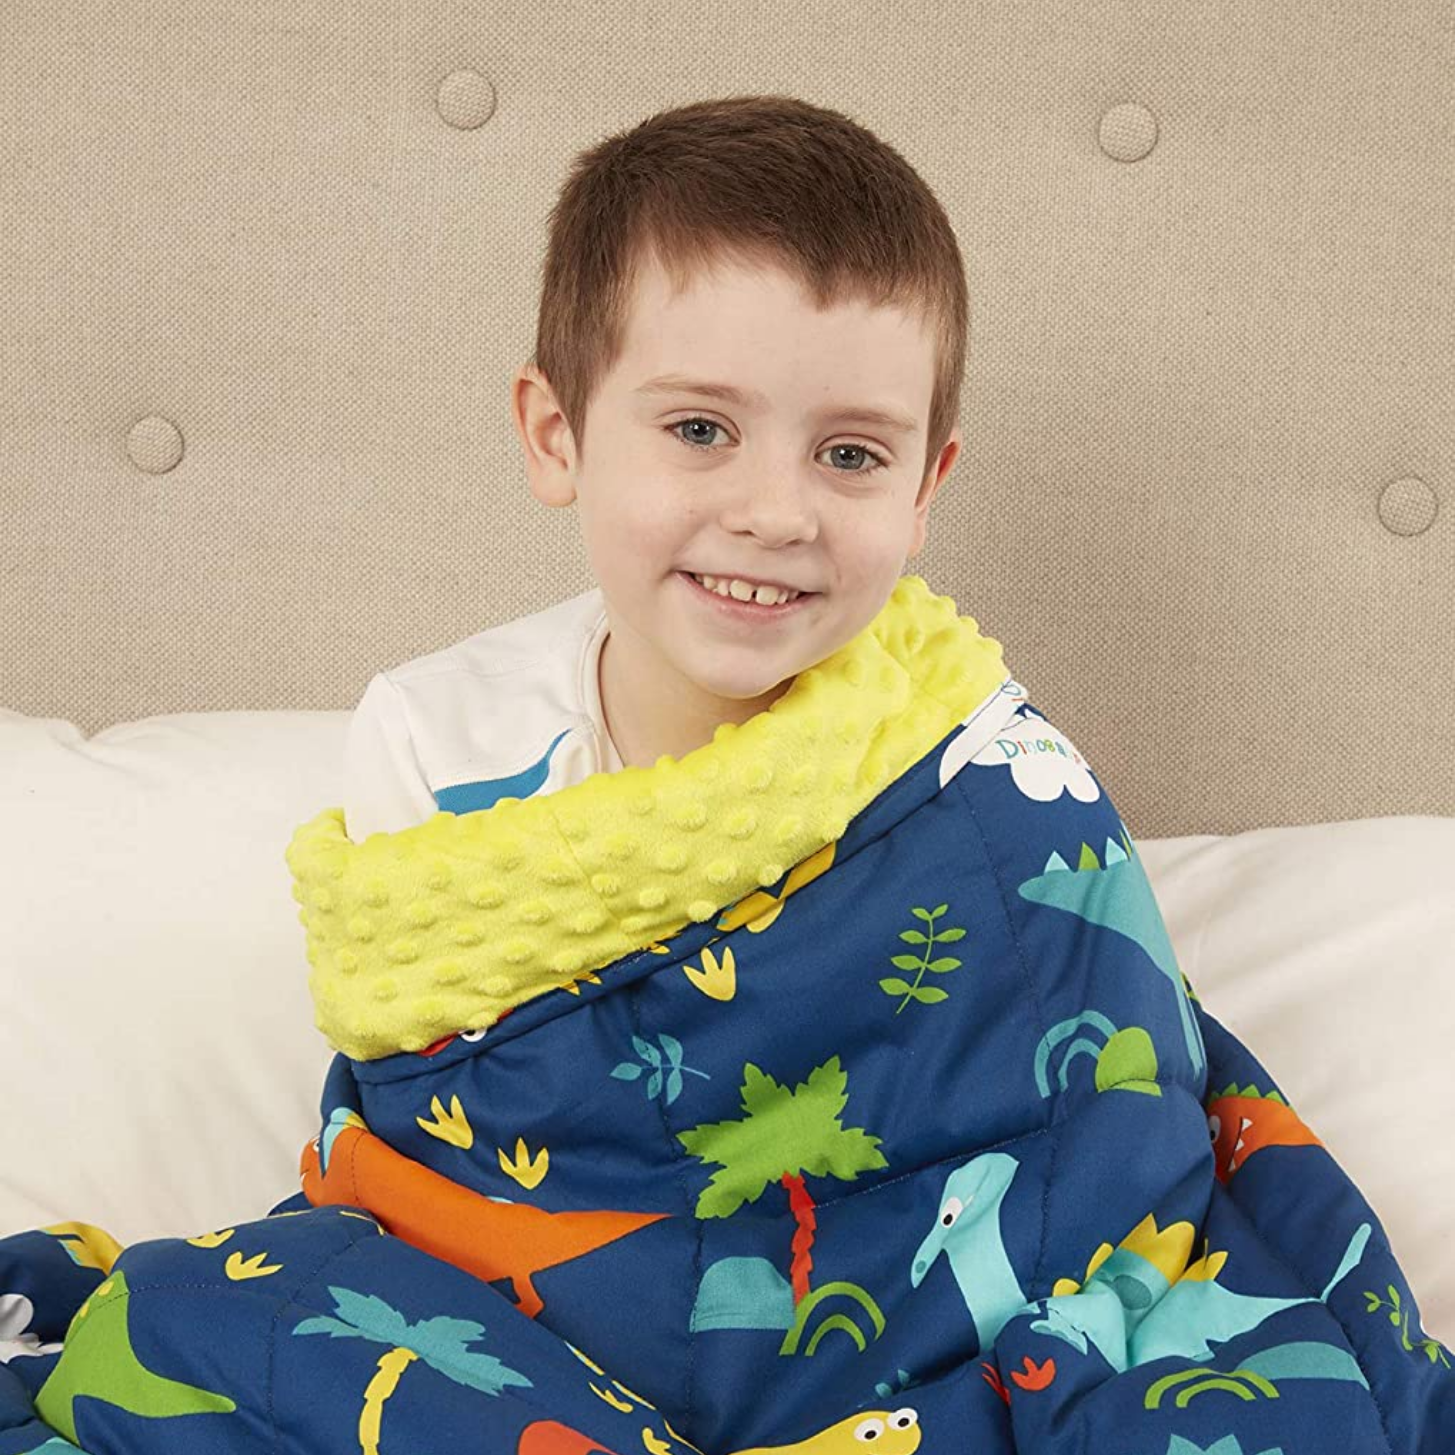 Sensorii's weighted blanket- Boy wrapped up in Sensorii's child weighted blanket in blue and yellow